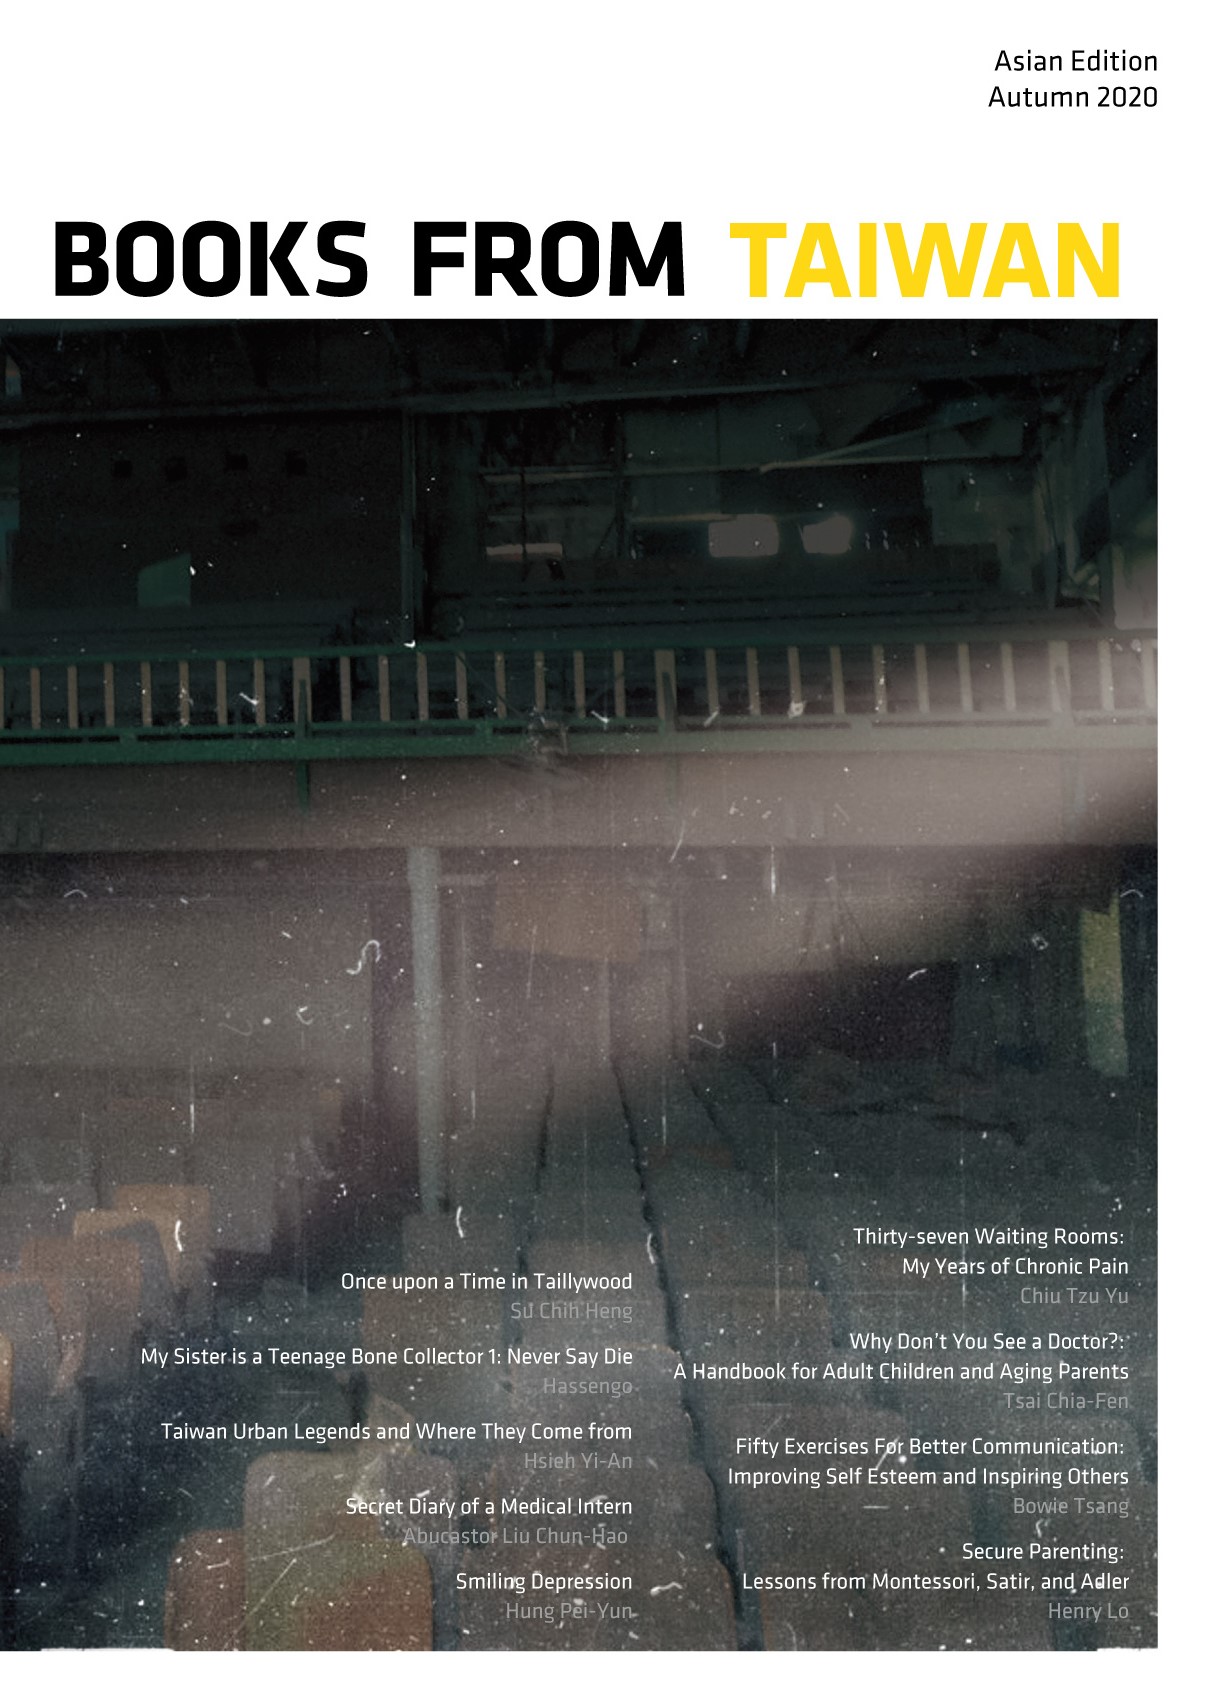 Books from Taiwan Asian Edition 2020